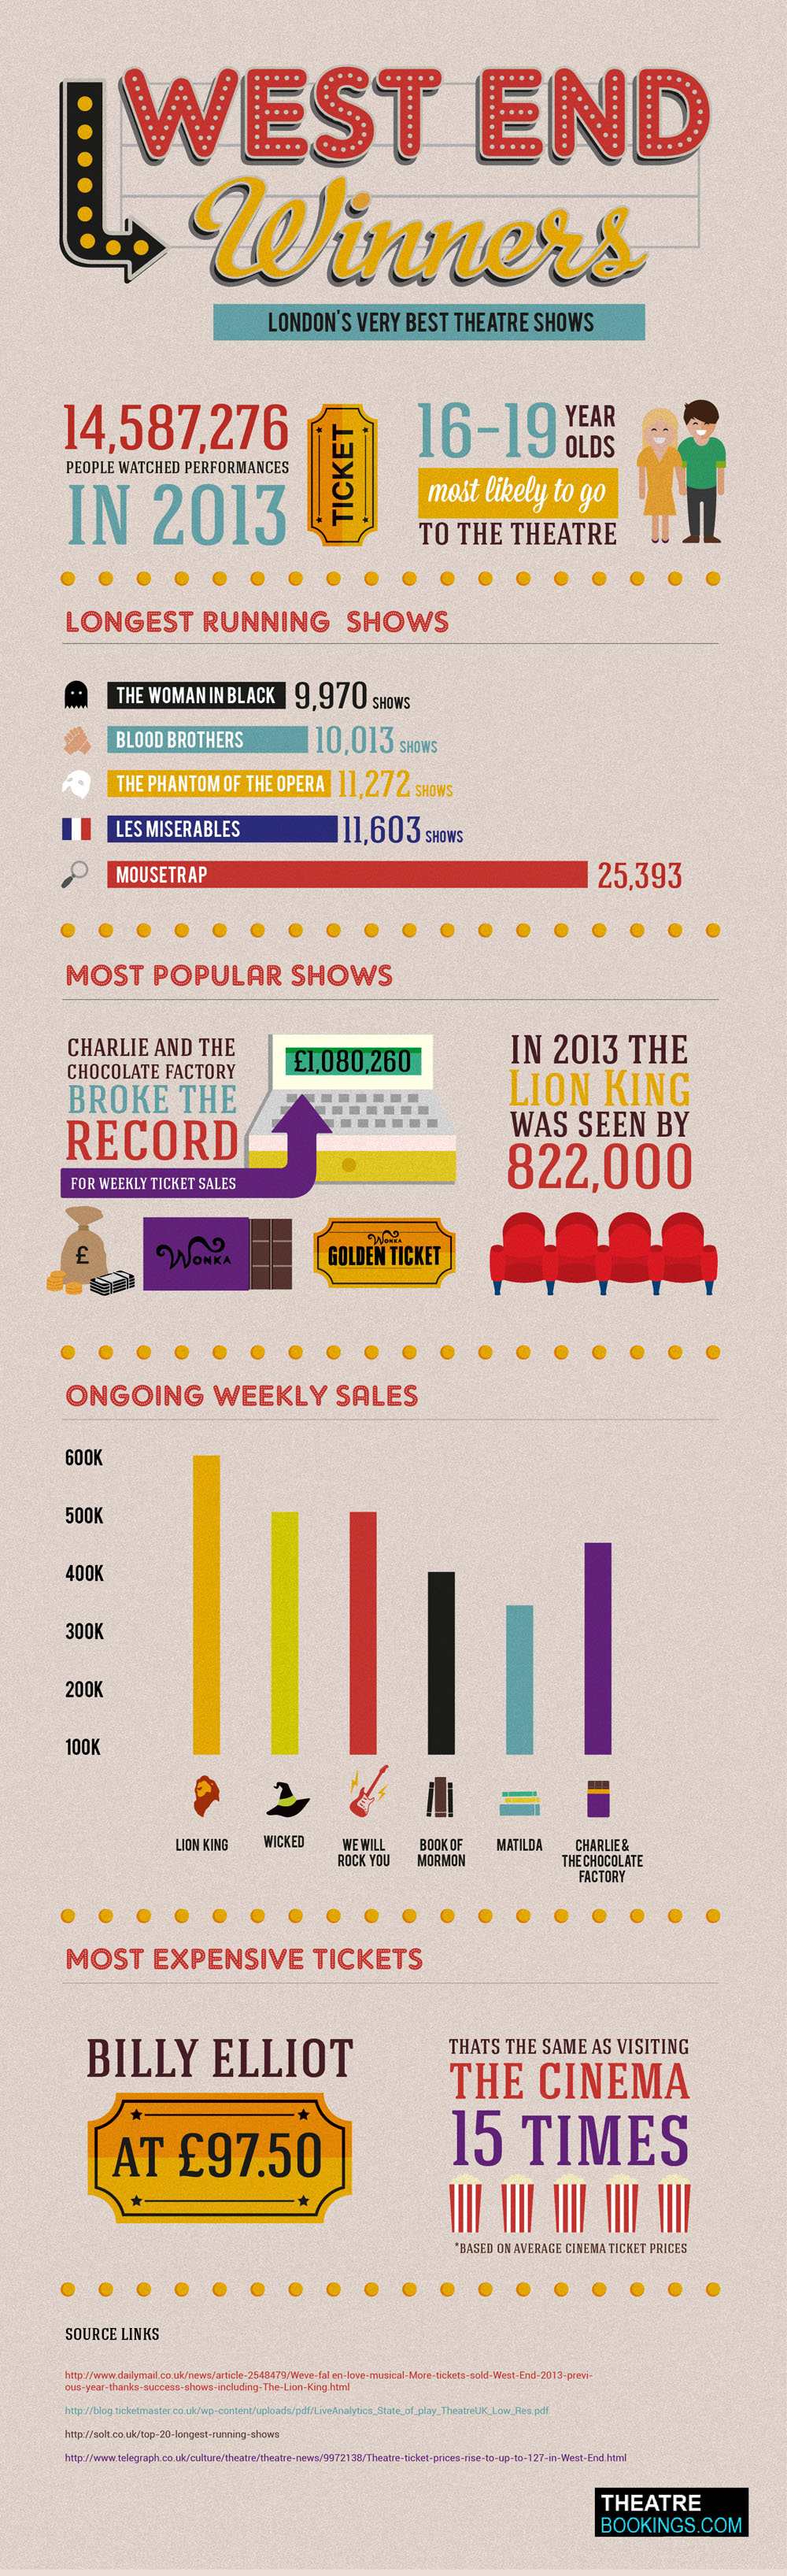 west end winners info graphics